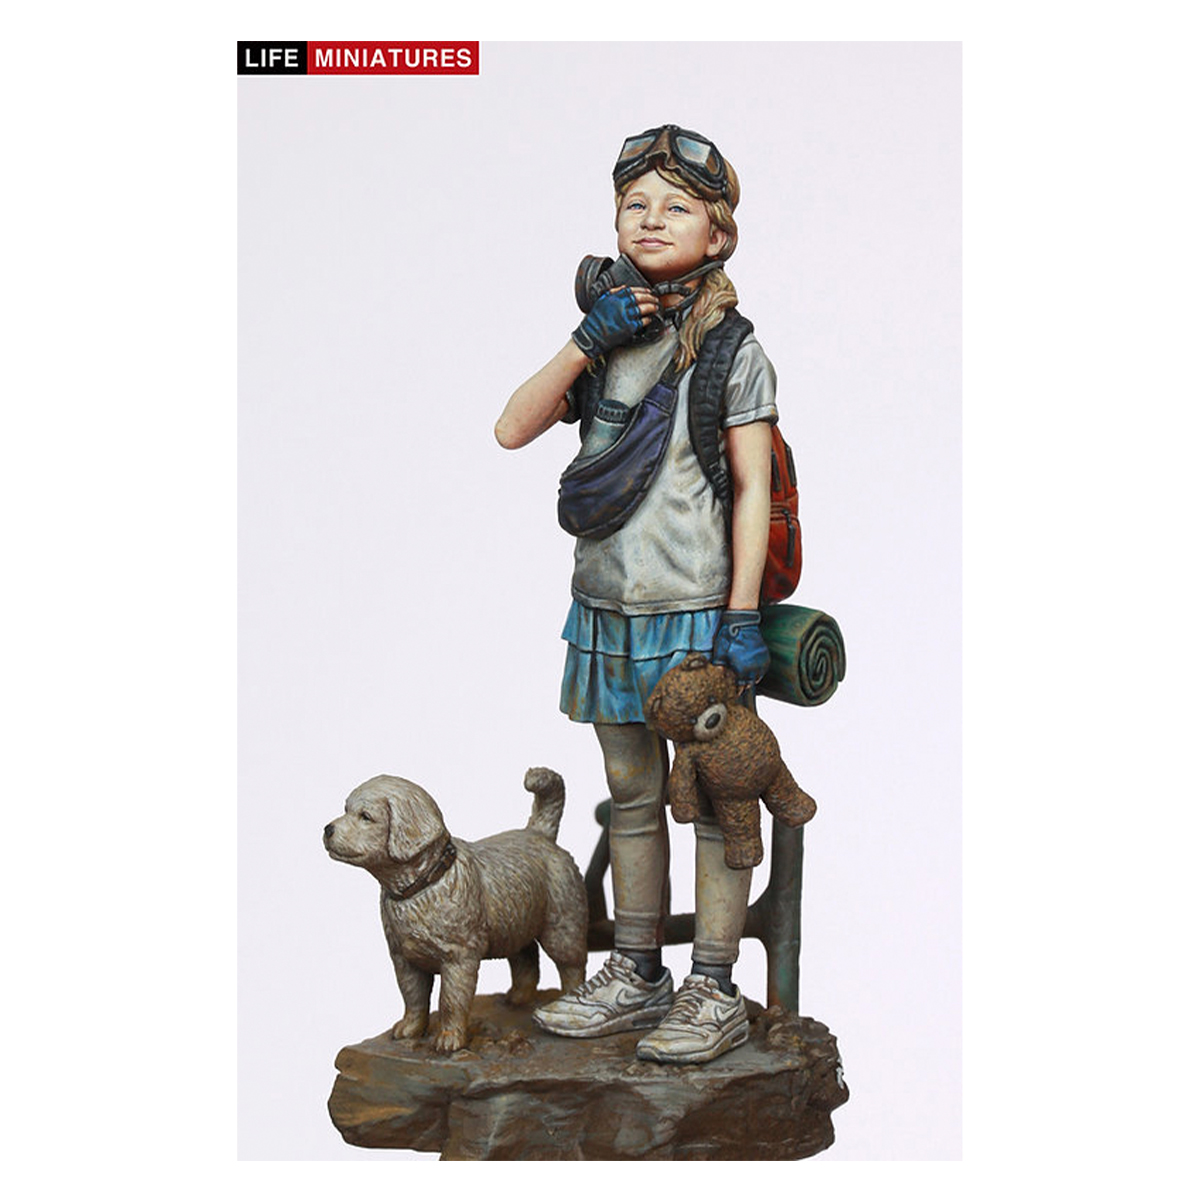 Life Miniatures – BREATH – Post Pandemic Kid (90mm scale)